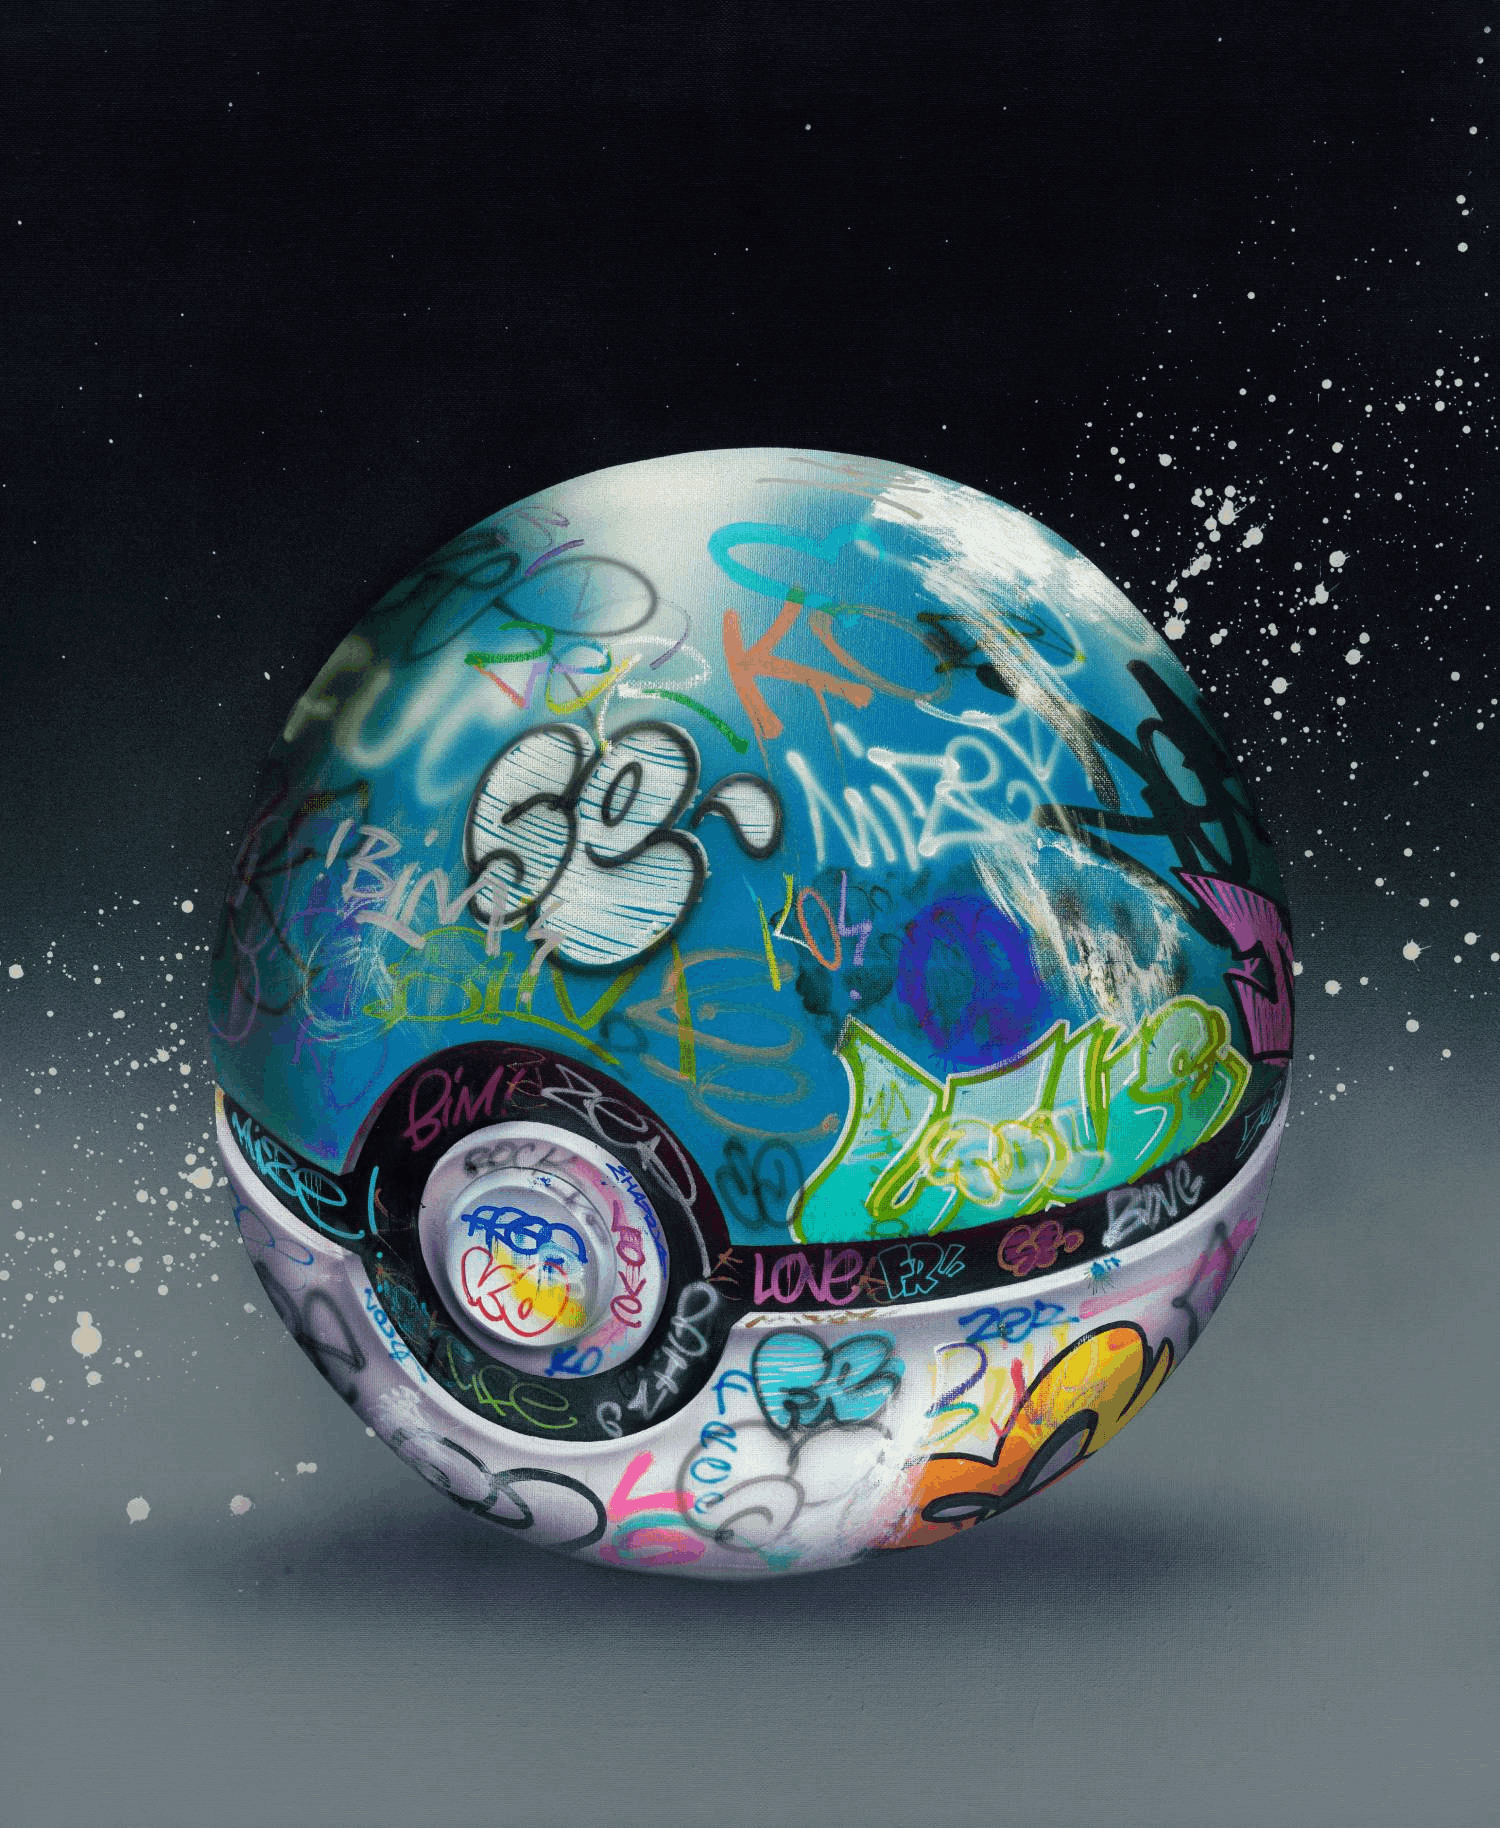 The Vandalized Ball by OneMizer (31/80)